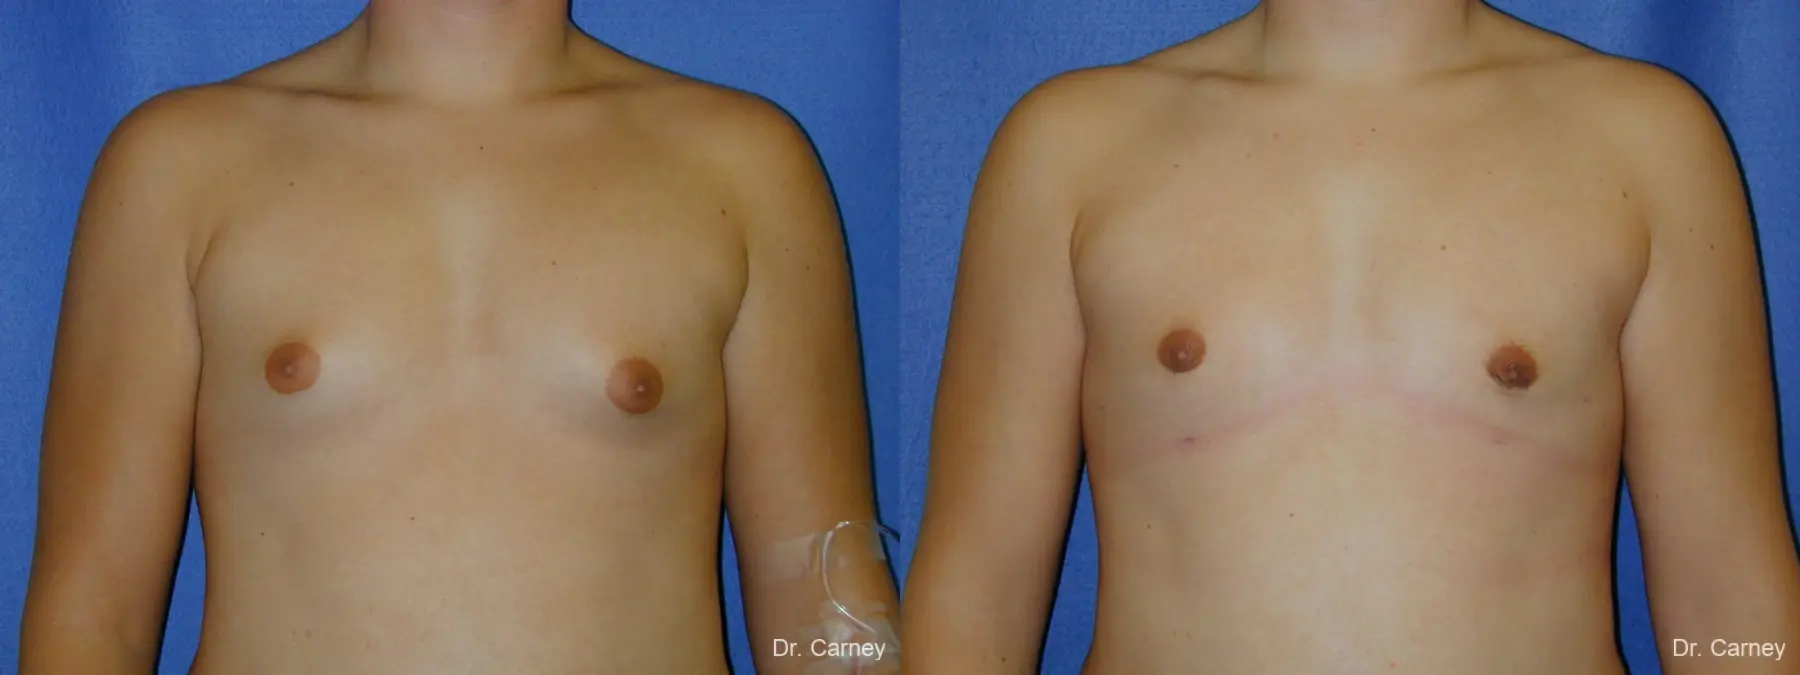 Virginia Beach Gynecomastia - Before and After